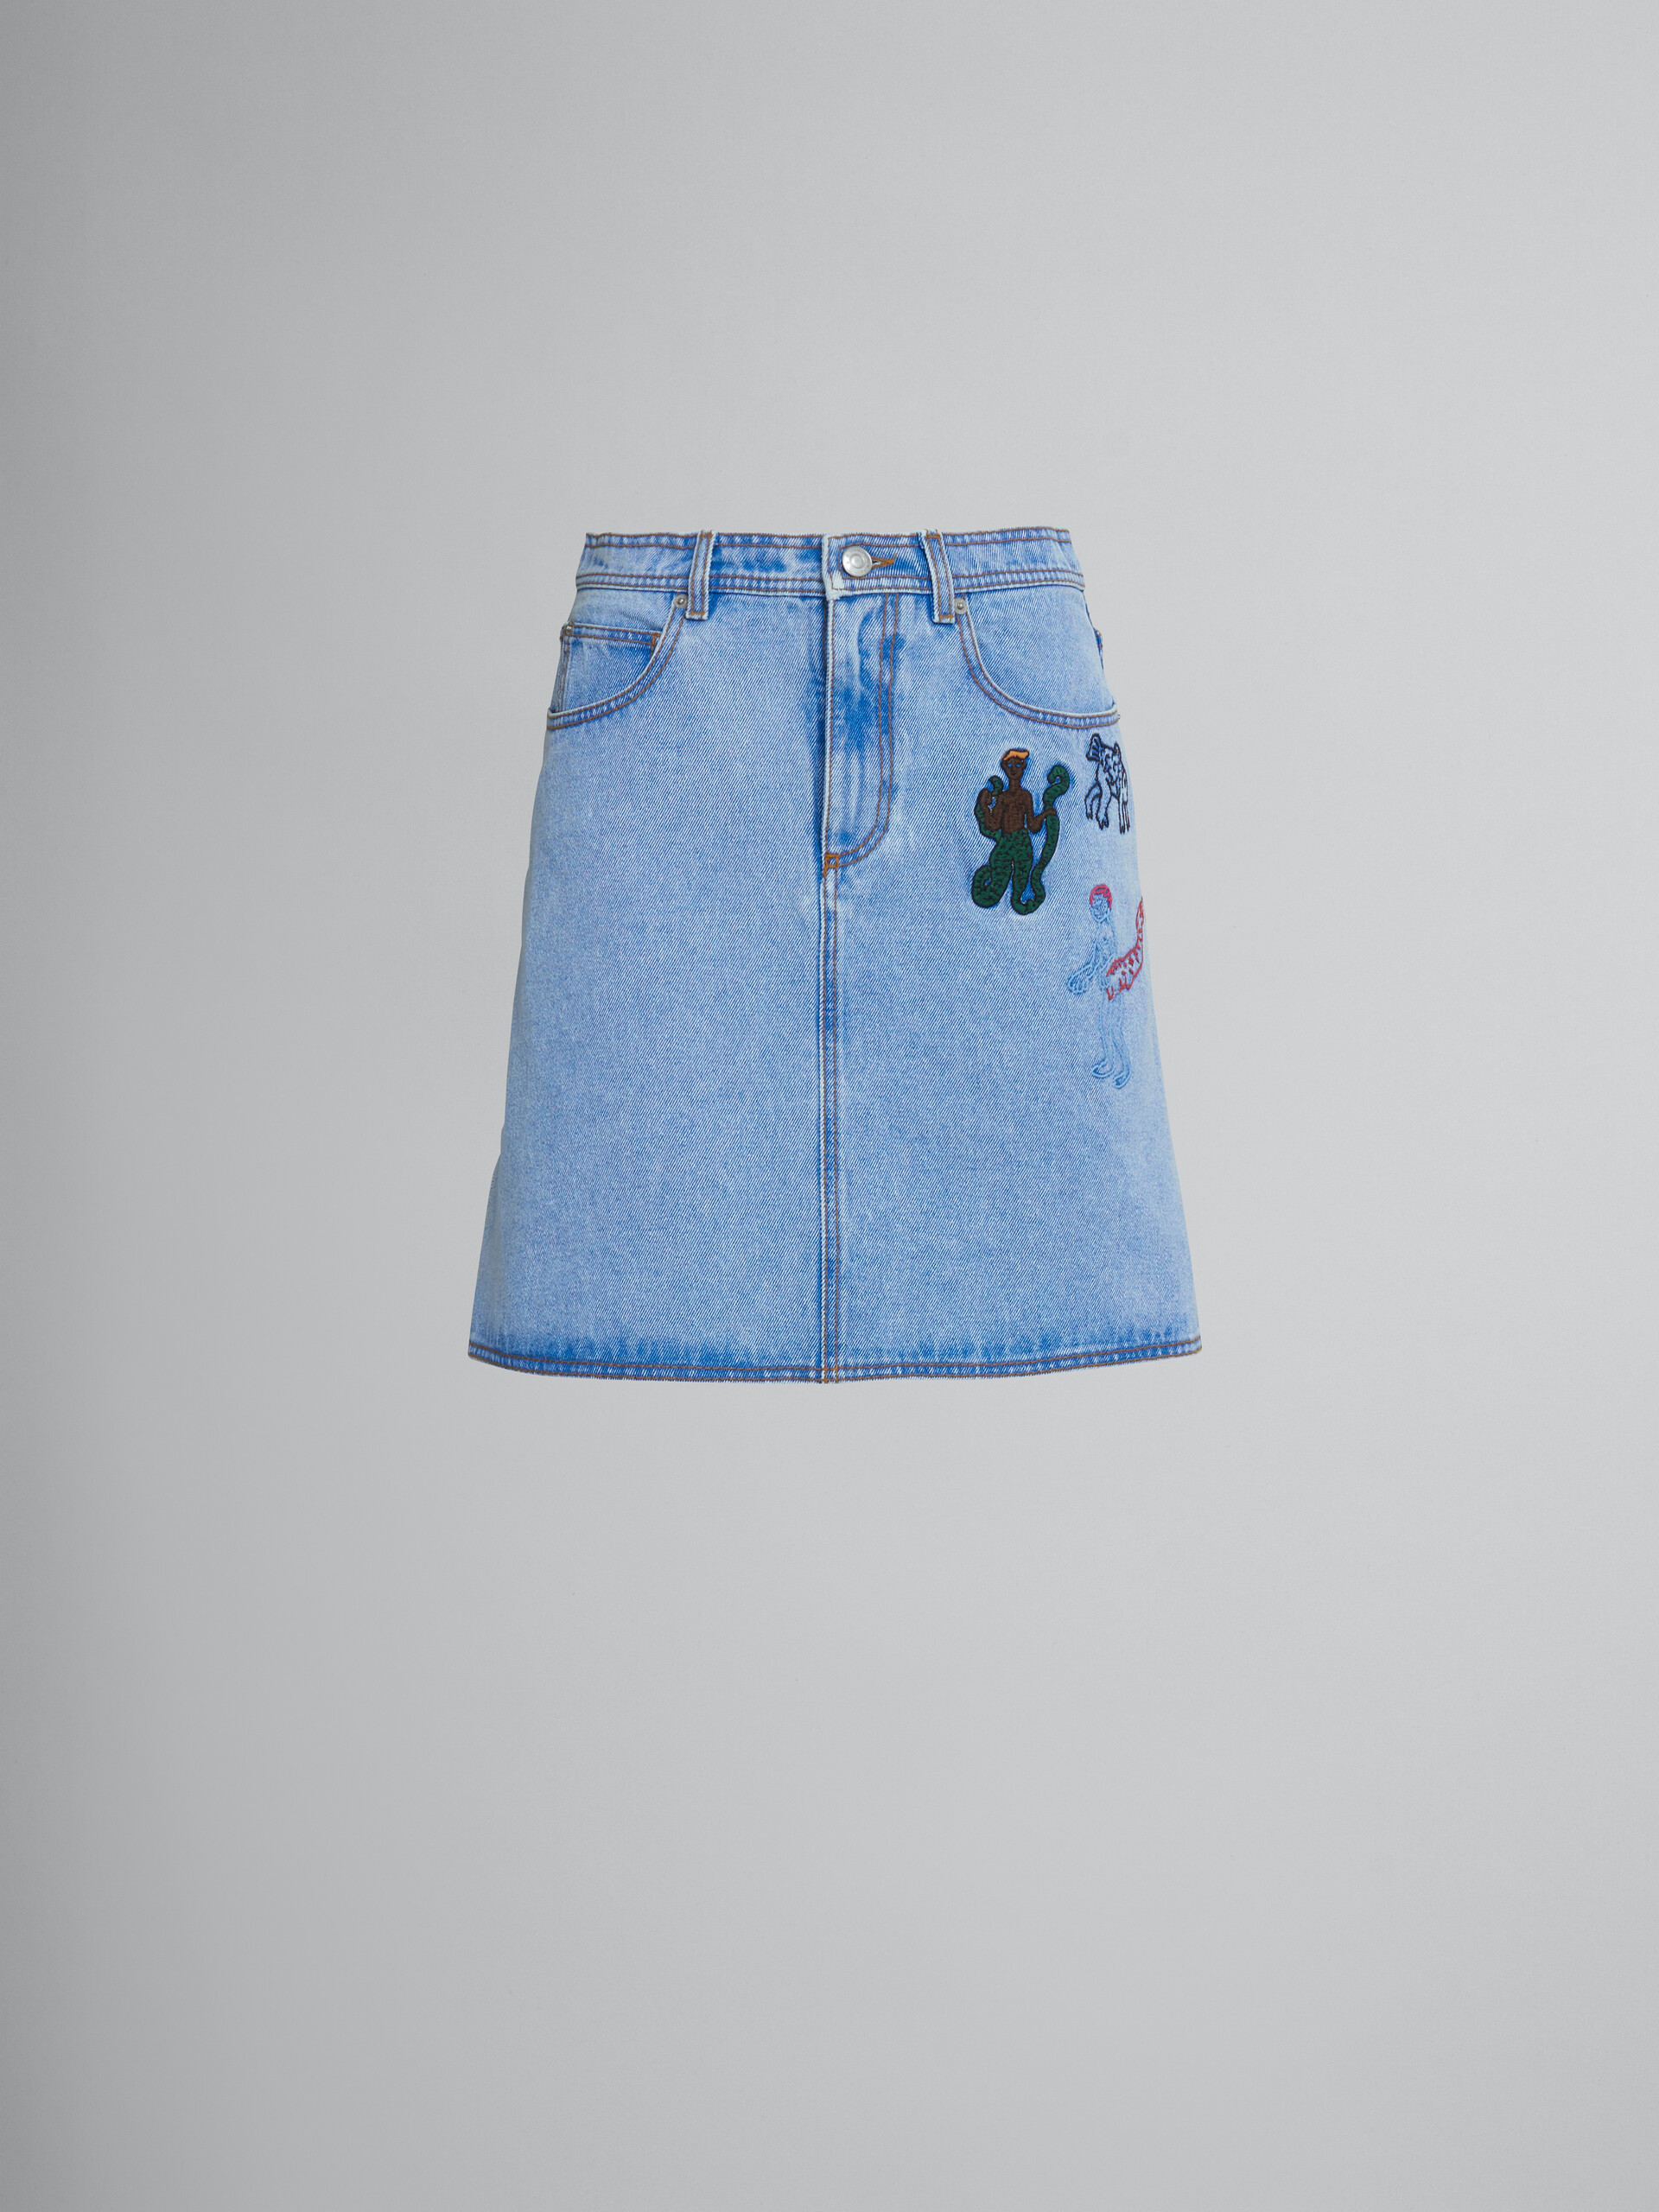 Light blue denim skirt with embroidery - Skirts - Image 1